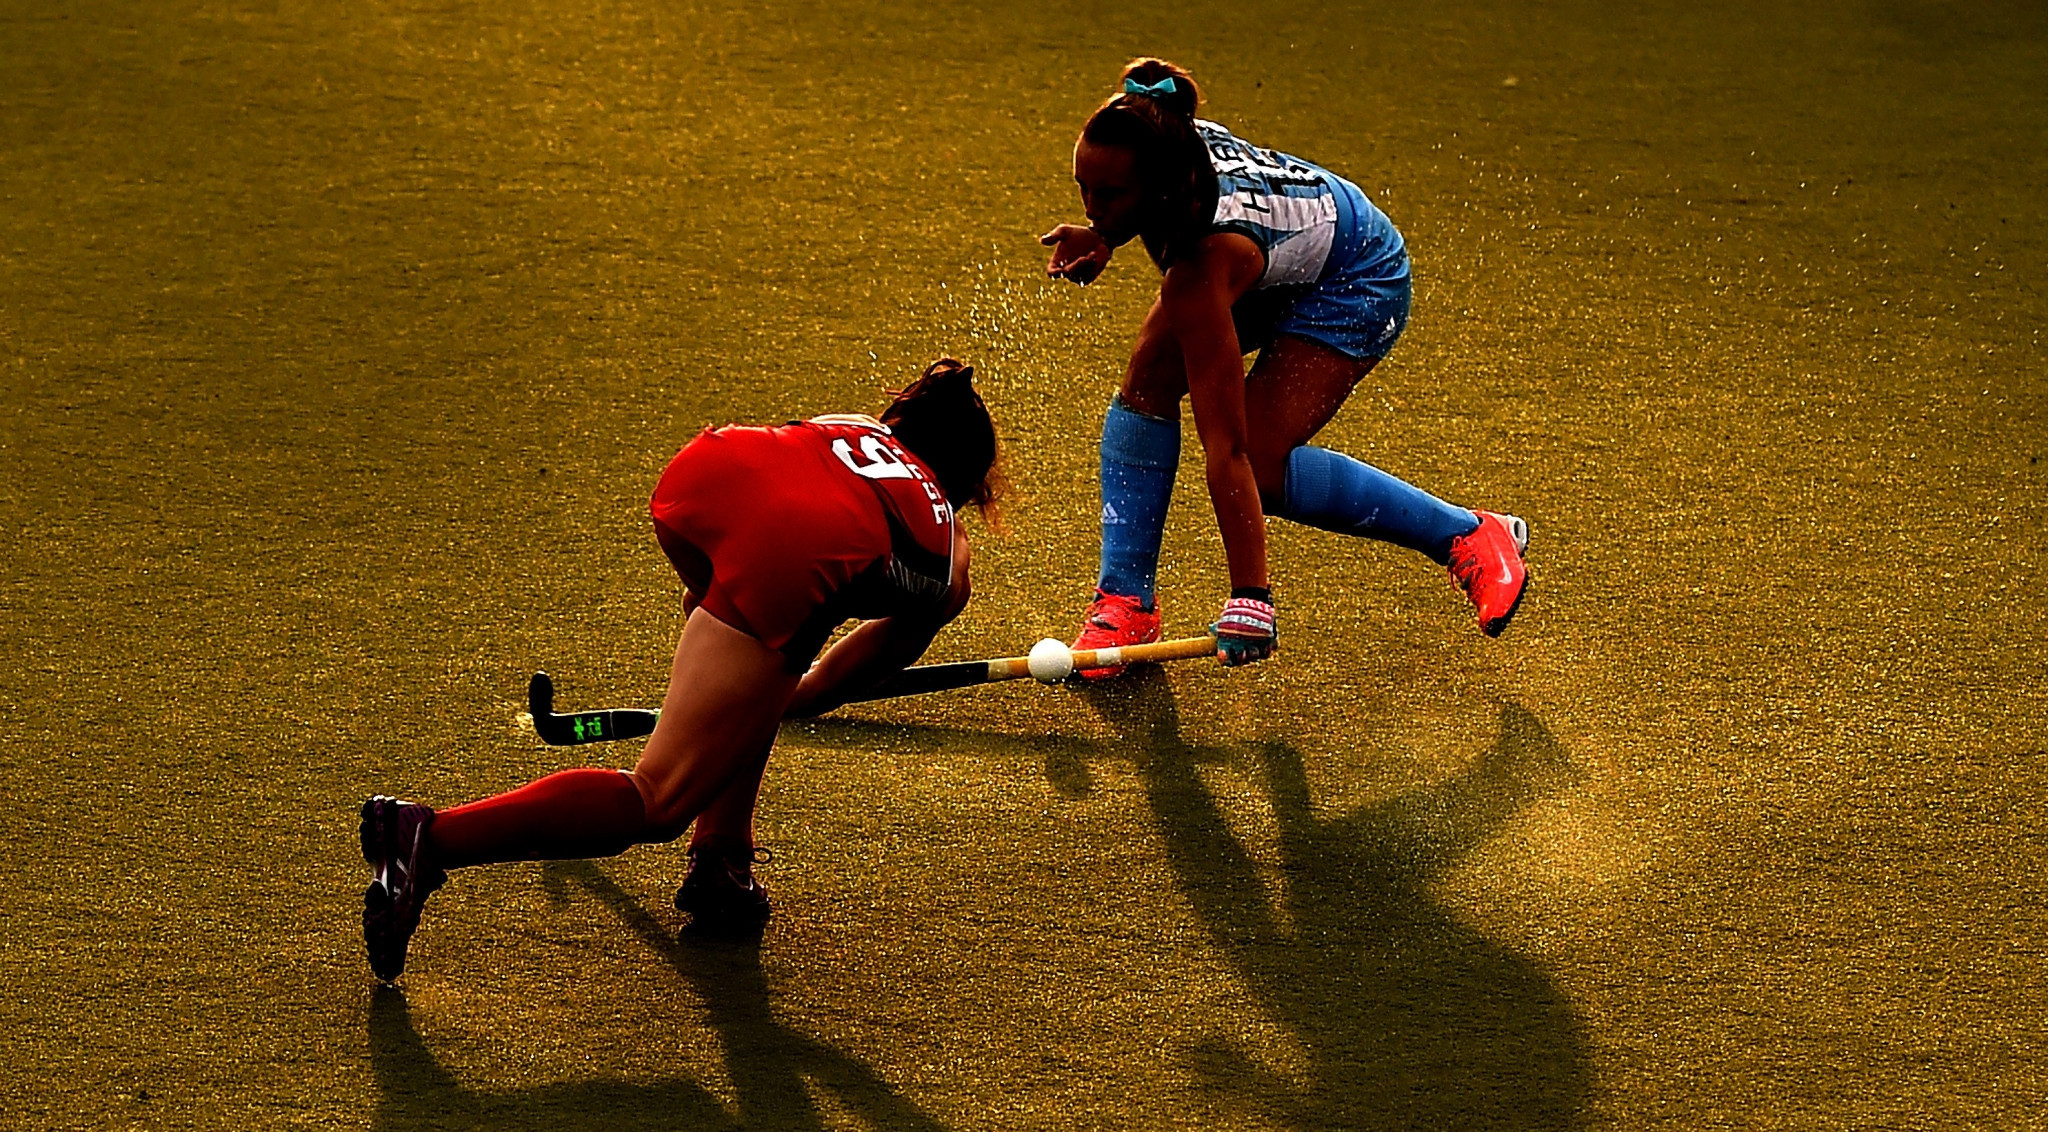 The women's field hockey U SPORTS National Championship will be among the first events subject to the vaccination order  ©Getty Images